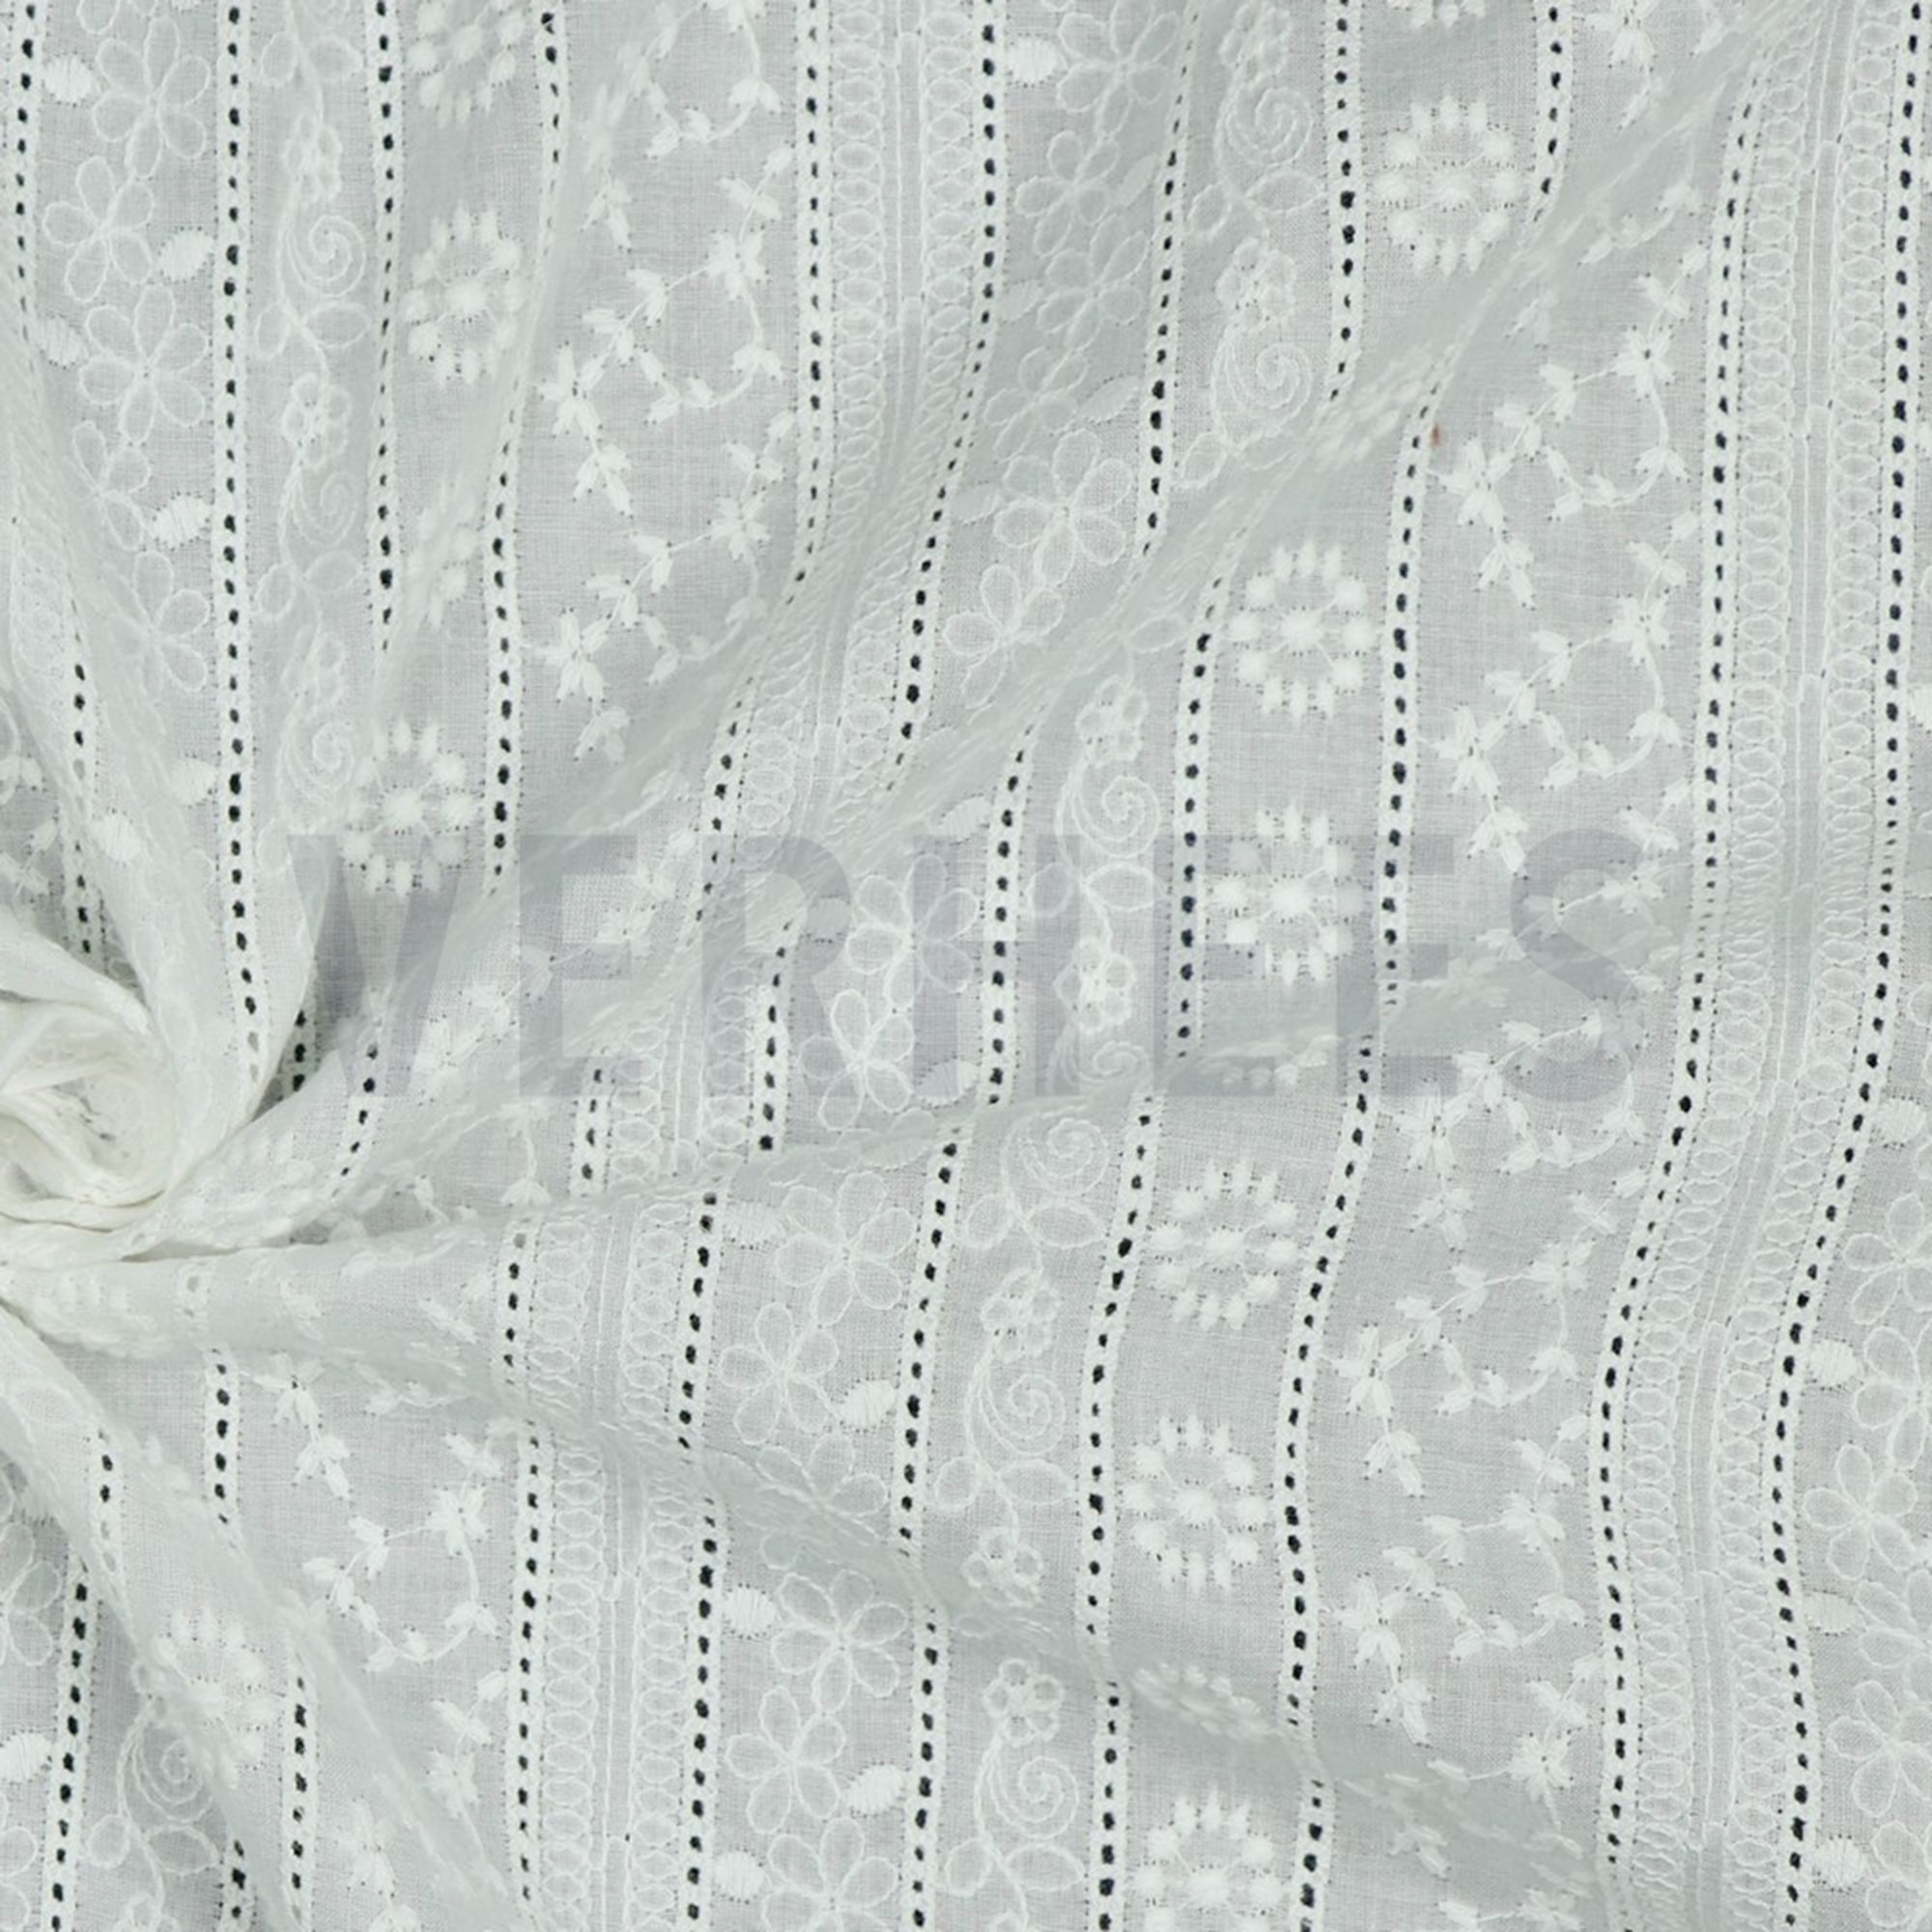 COTTON EMBROIDERY WHITE (high resolution) #3